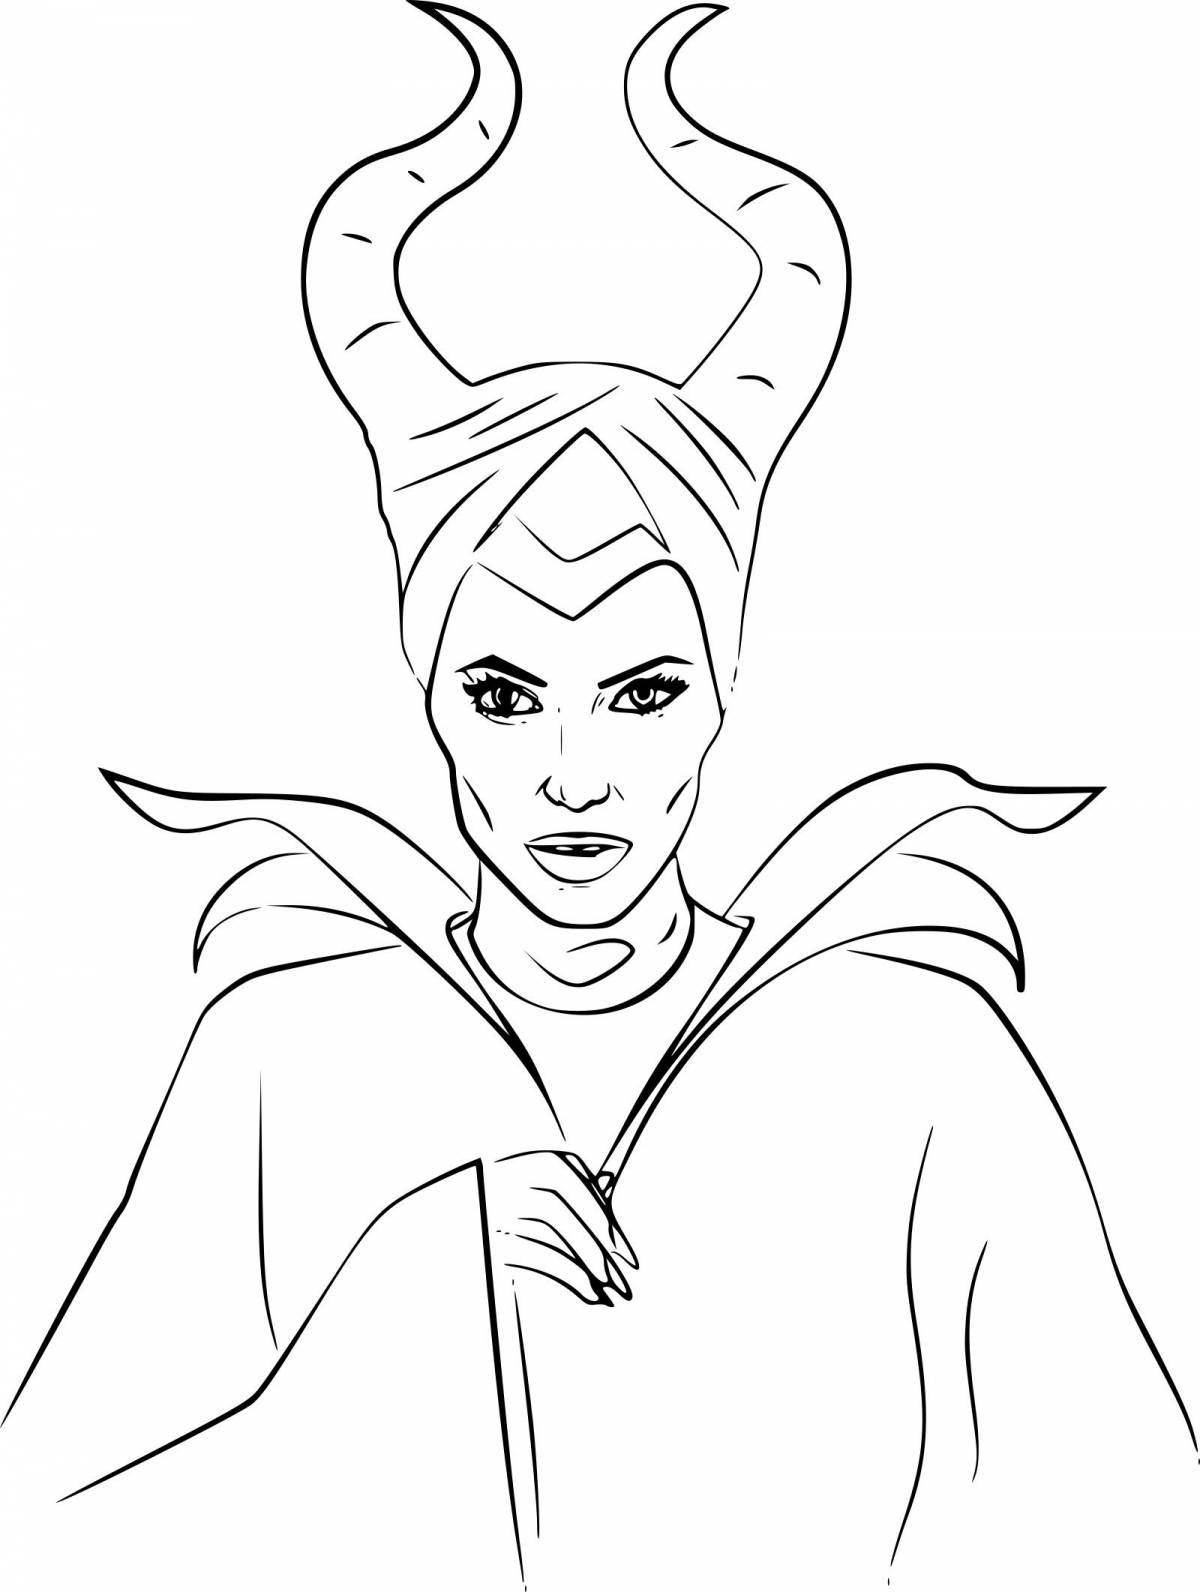 Sweet maleficent coloring for kids